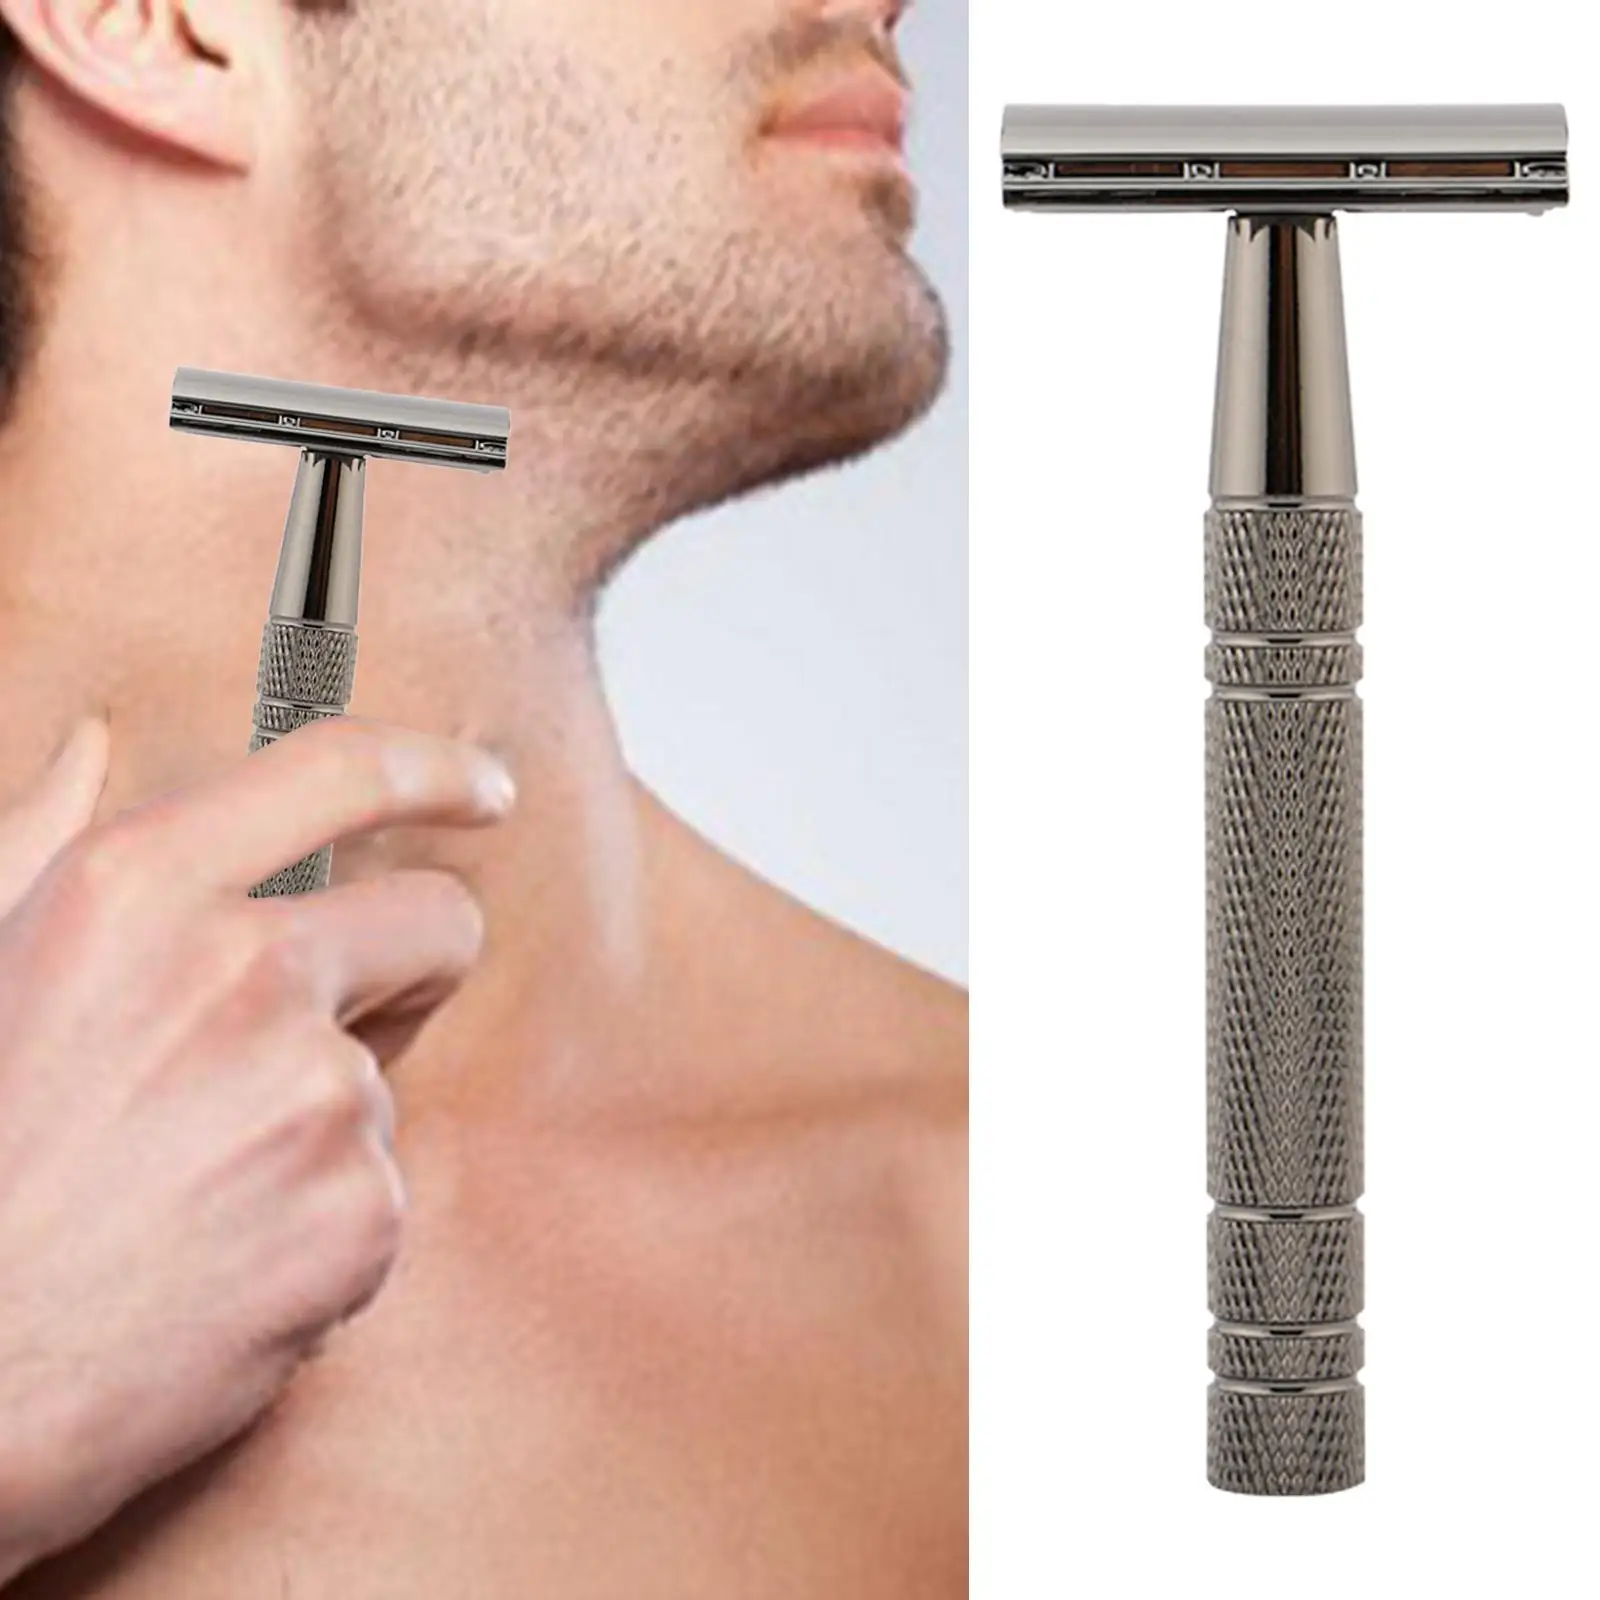 Double Edge Safety Razor Shaving Long Handle Face Hair Removal for Men with 5Pcs Razor Blades